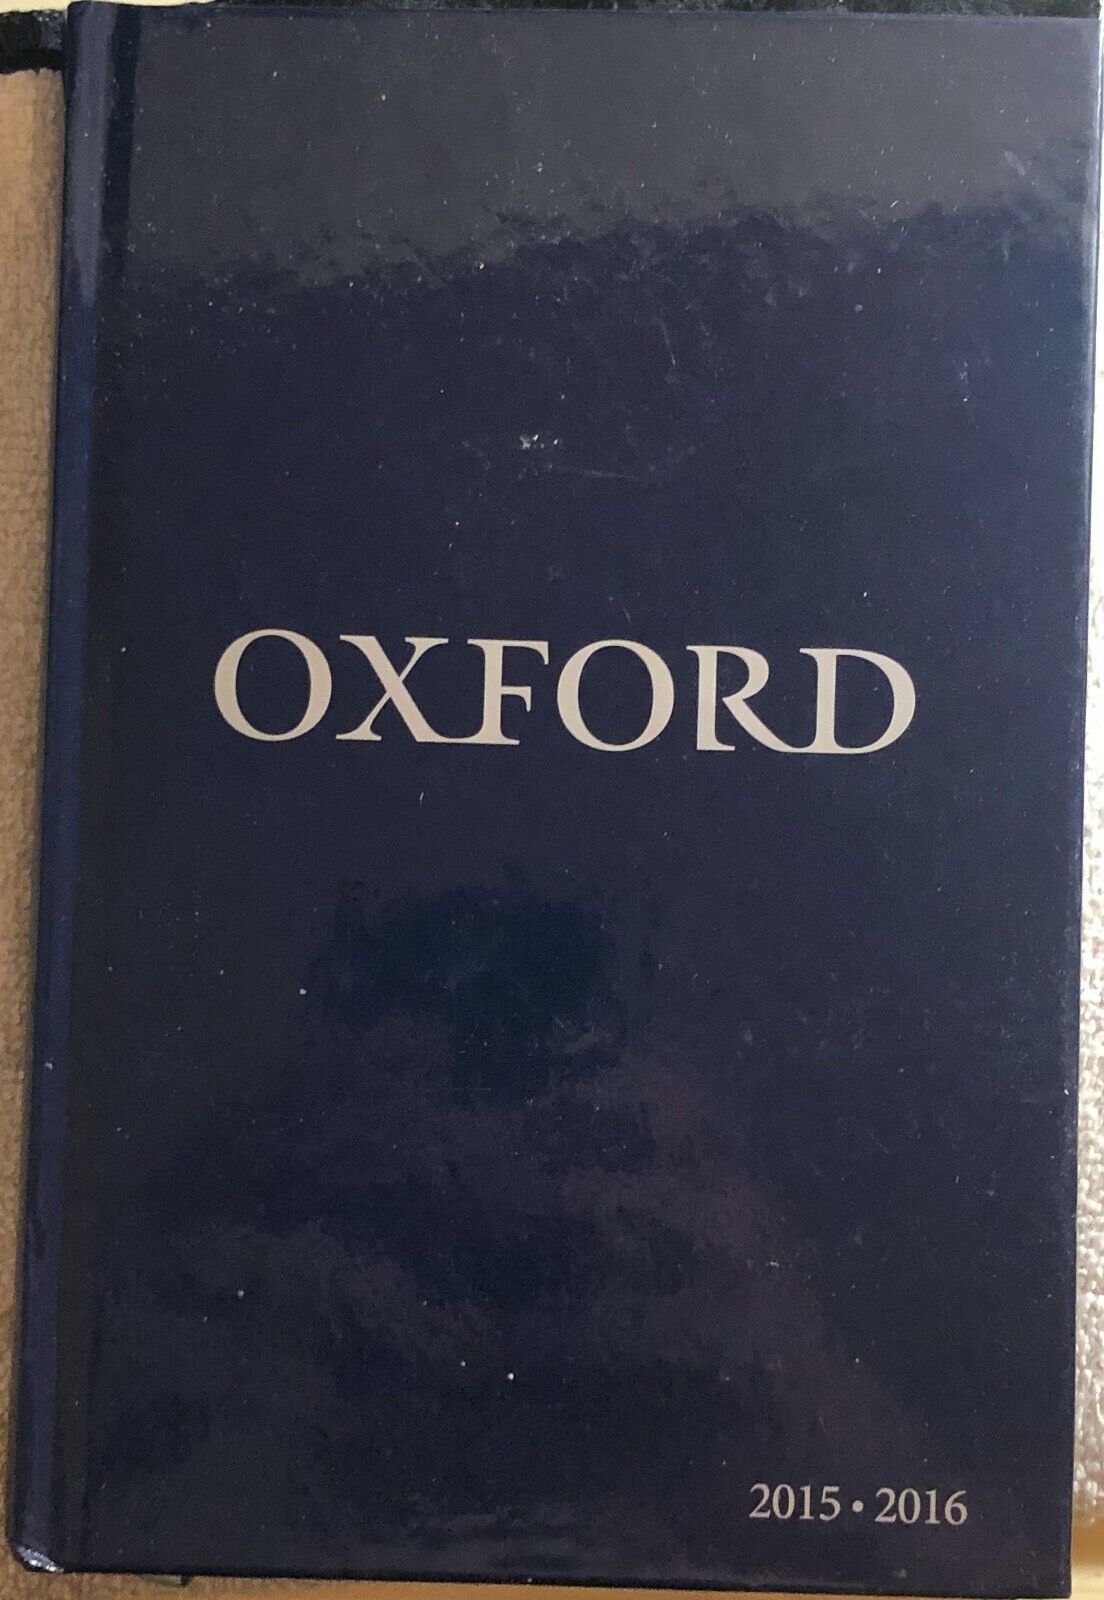 Oxford weekly planner 2015-2016 di Aa.vv.,  2015,  Oxford University Press